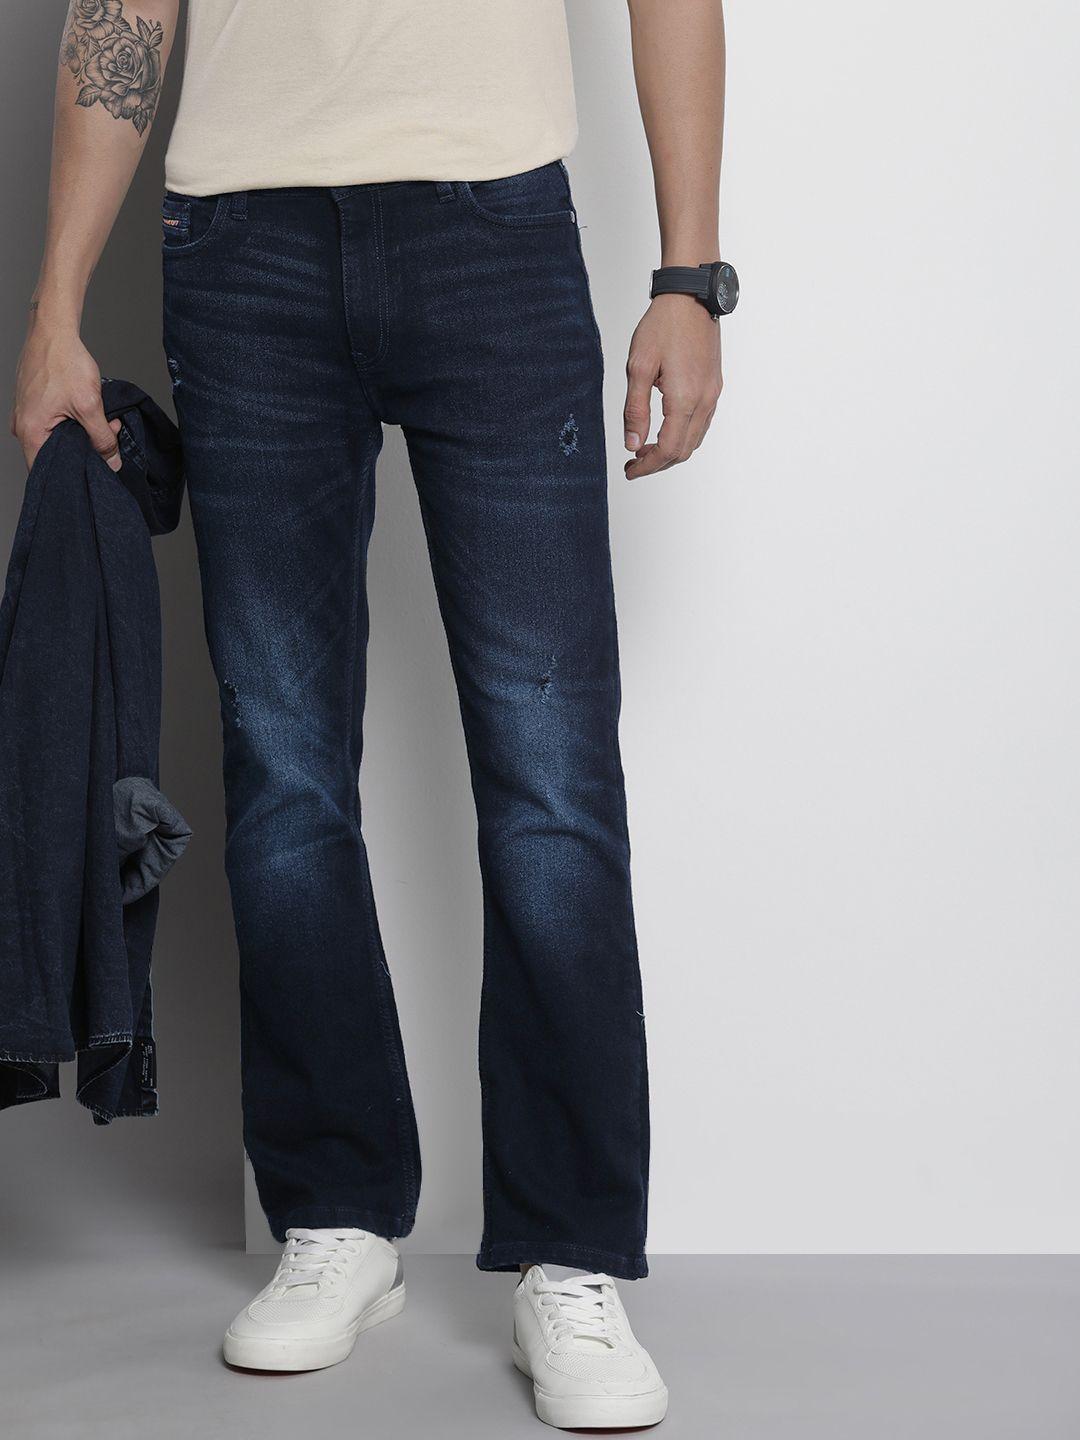 the-indian-garage-co-men-bootcut-light-fade-stretchable-jeans